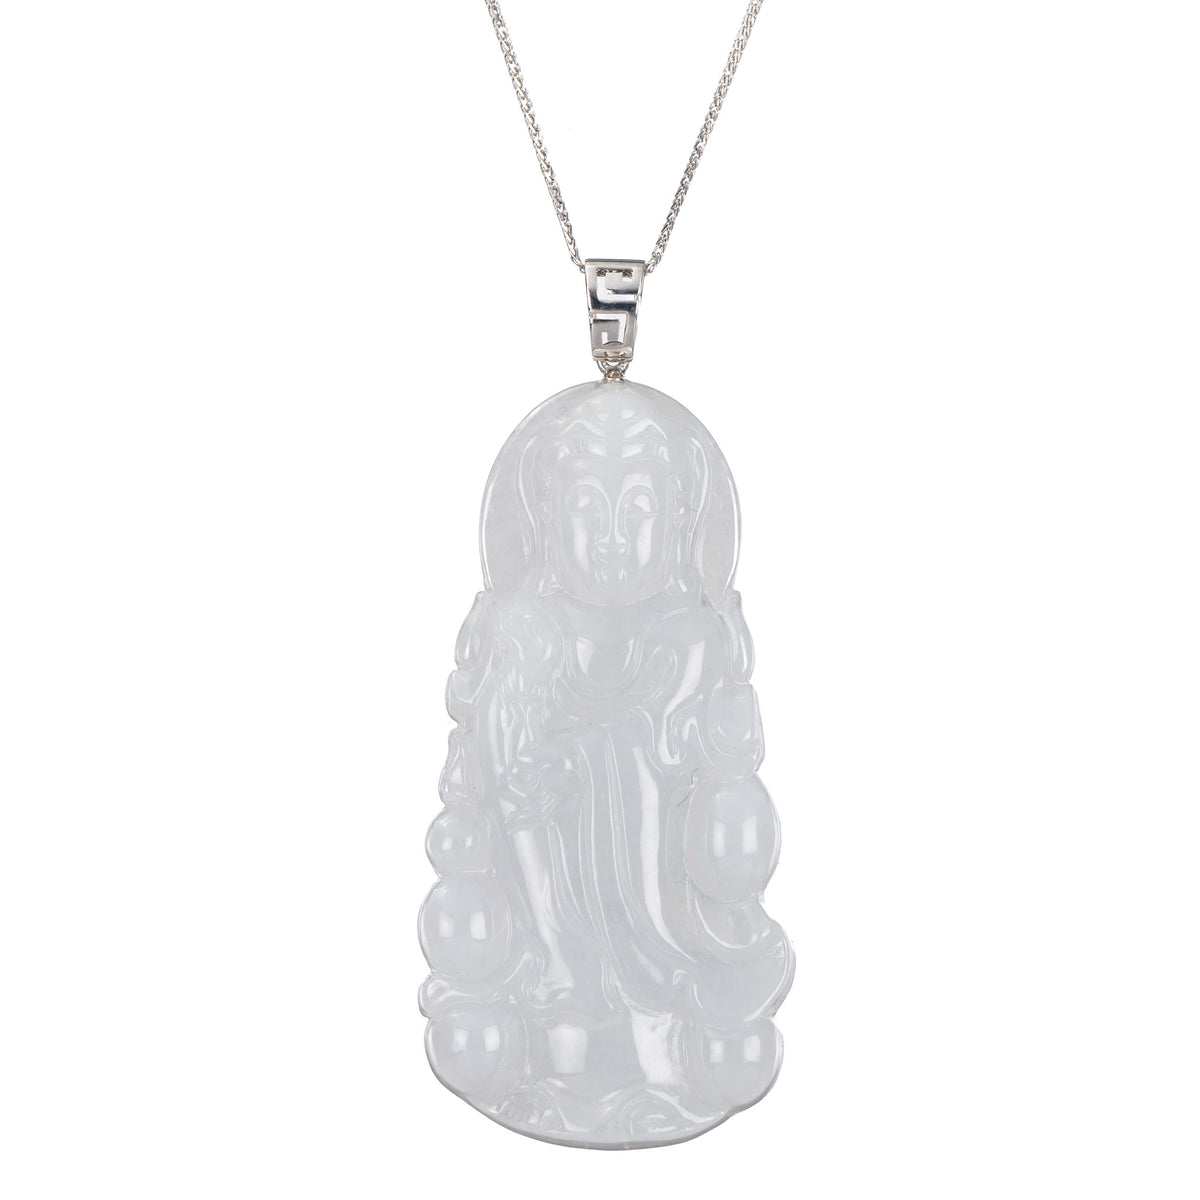 Standing GuanYin Jade Necklace - 18K White Gold